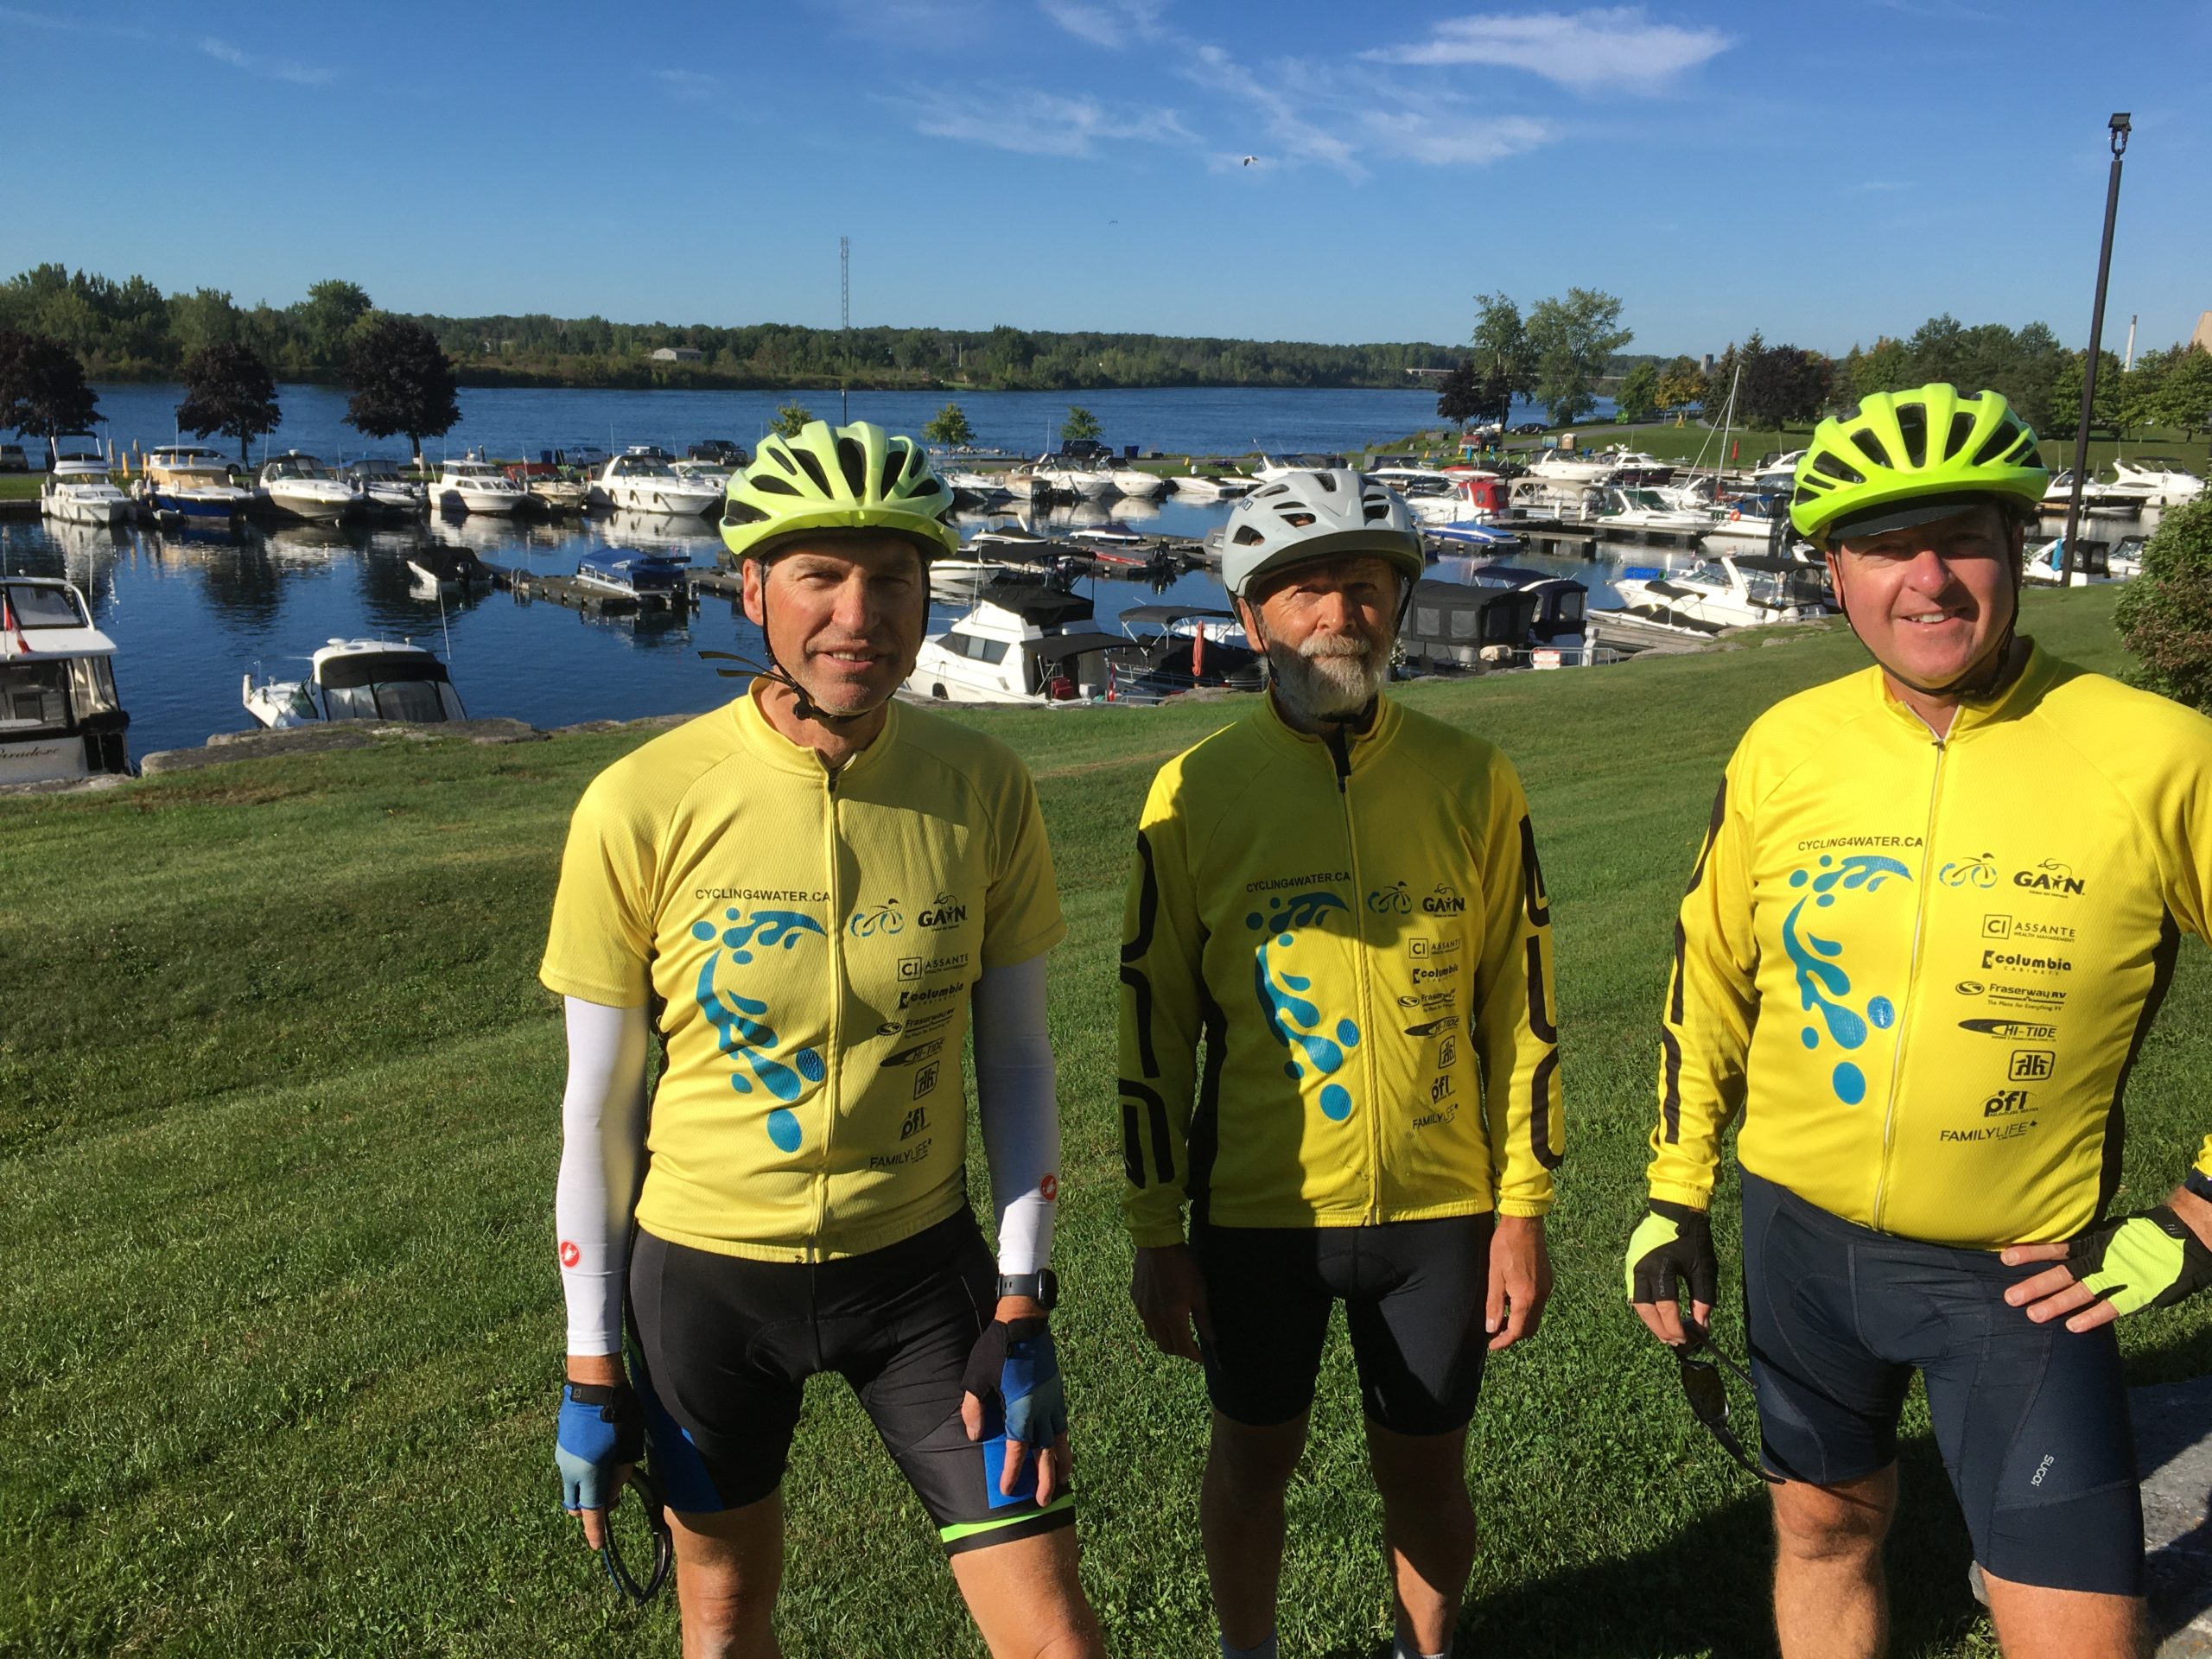 Day 53: Cornwall to Montreal – 112 KM